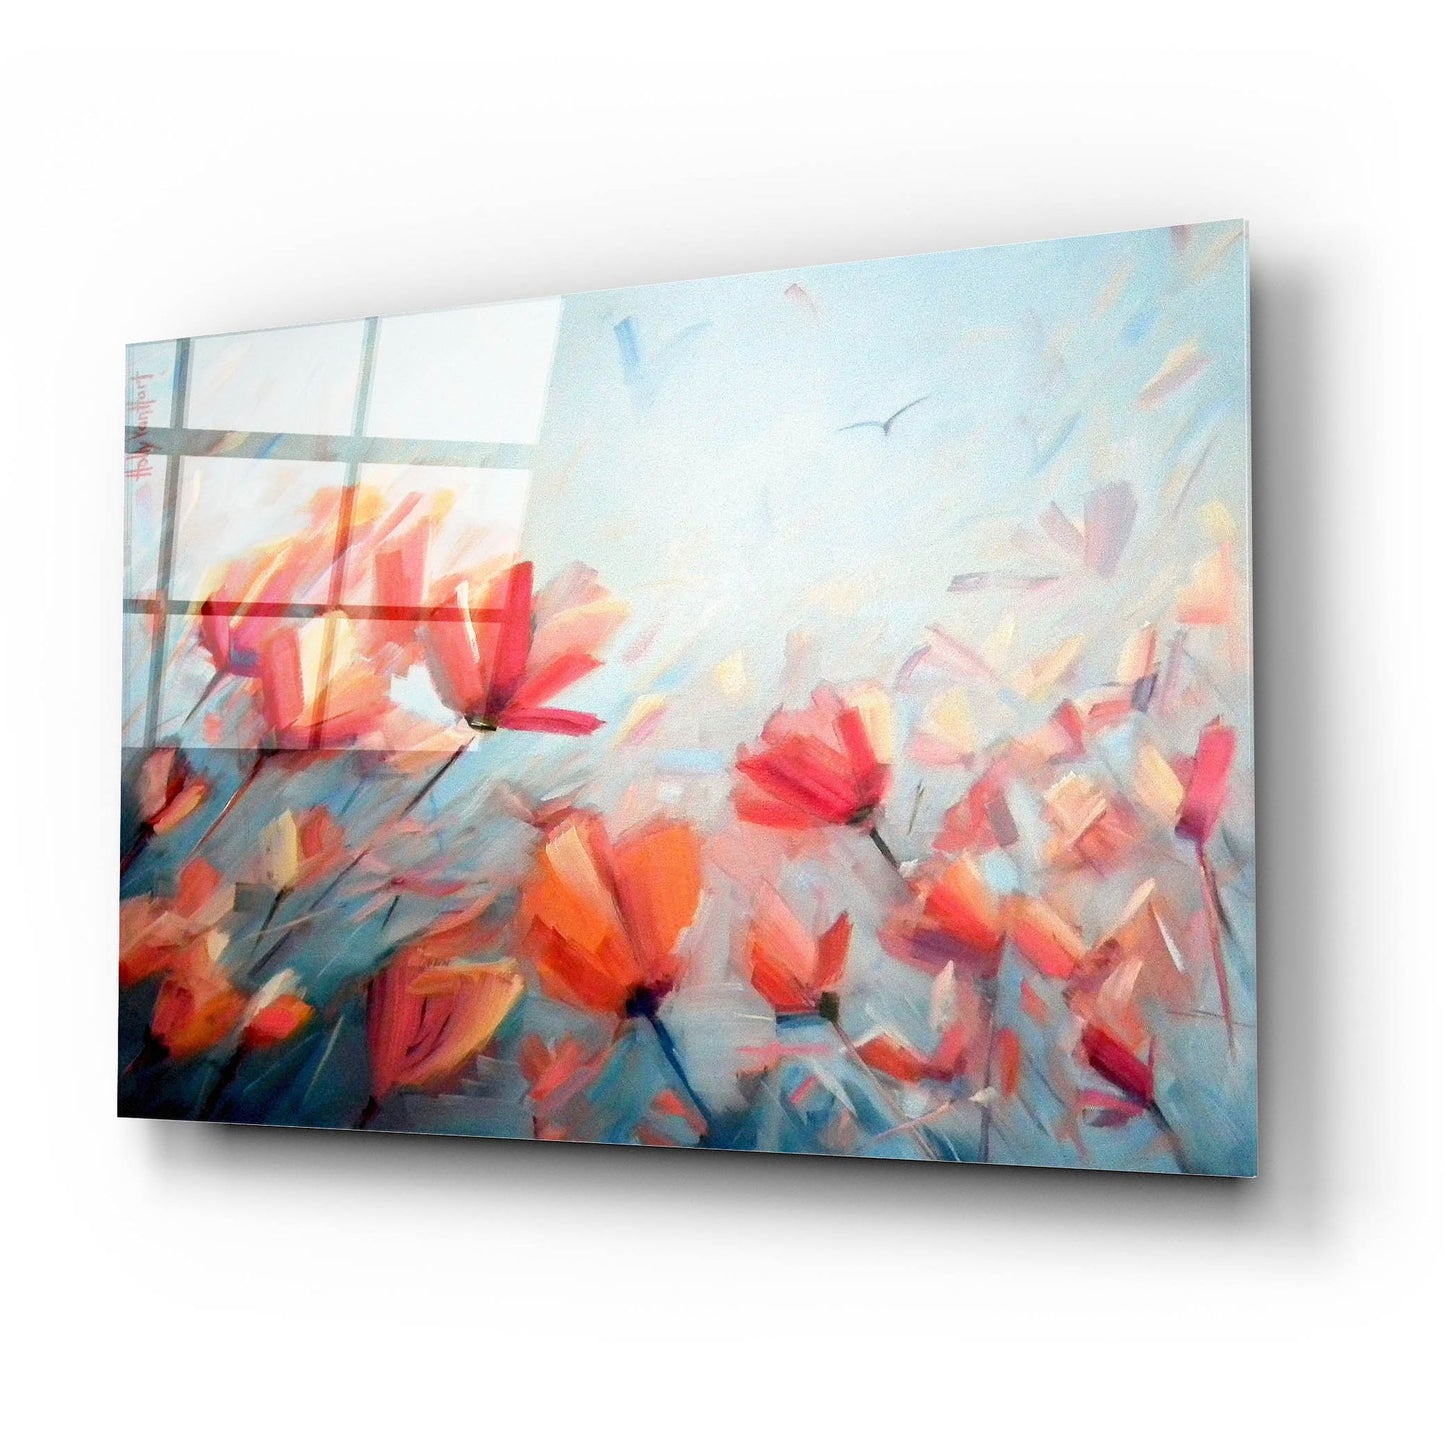 Epic Art 'Dreaming In Full Color' by Holly Van Hart, Acrylic Glass Wall Art,24x16